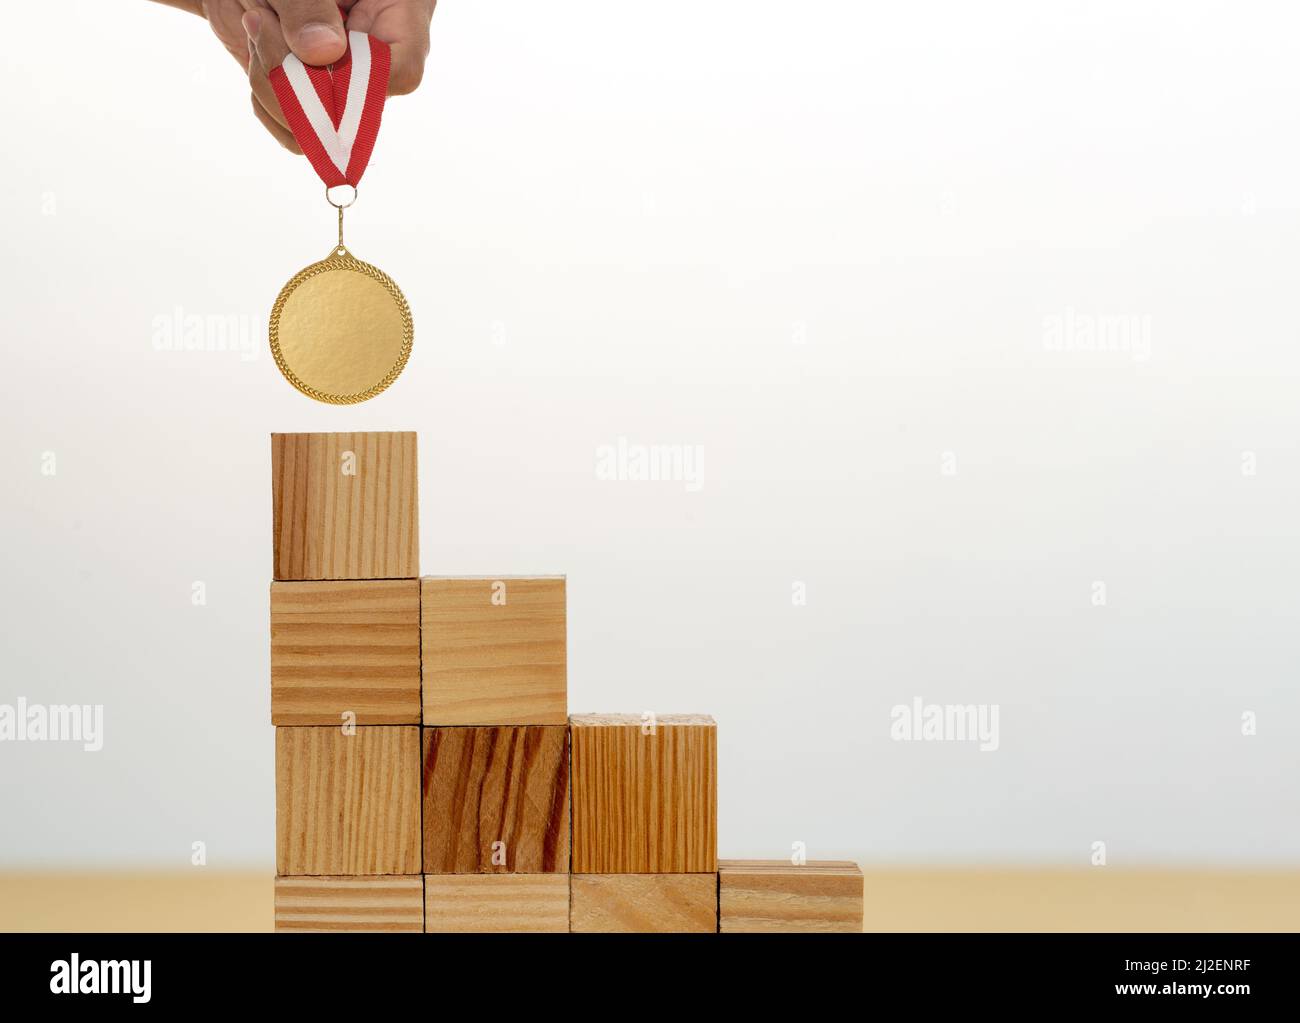 Step up ladder made of wooden blocks on the top golden medal as a symbol of aim ambition motivation on success. Stock Photo